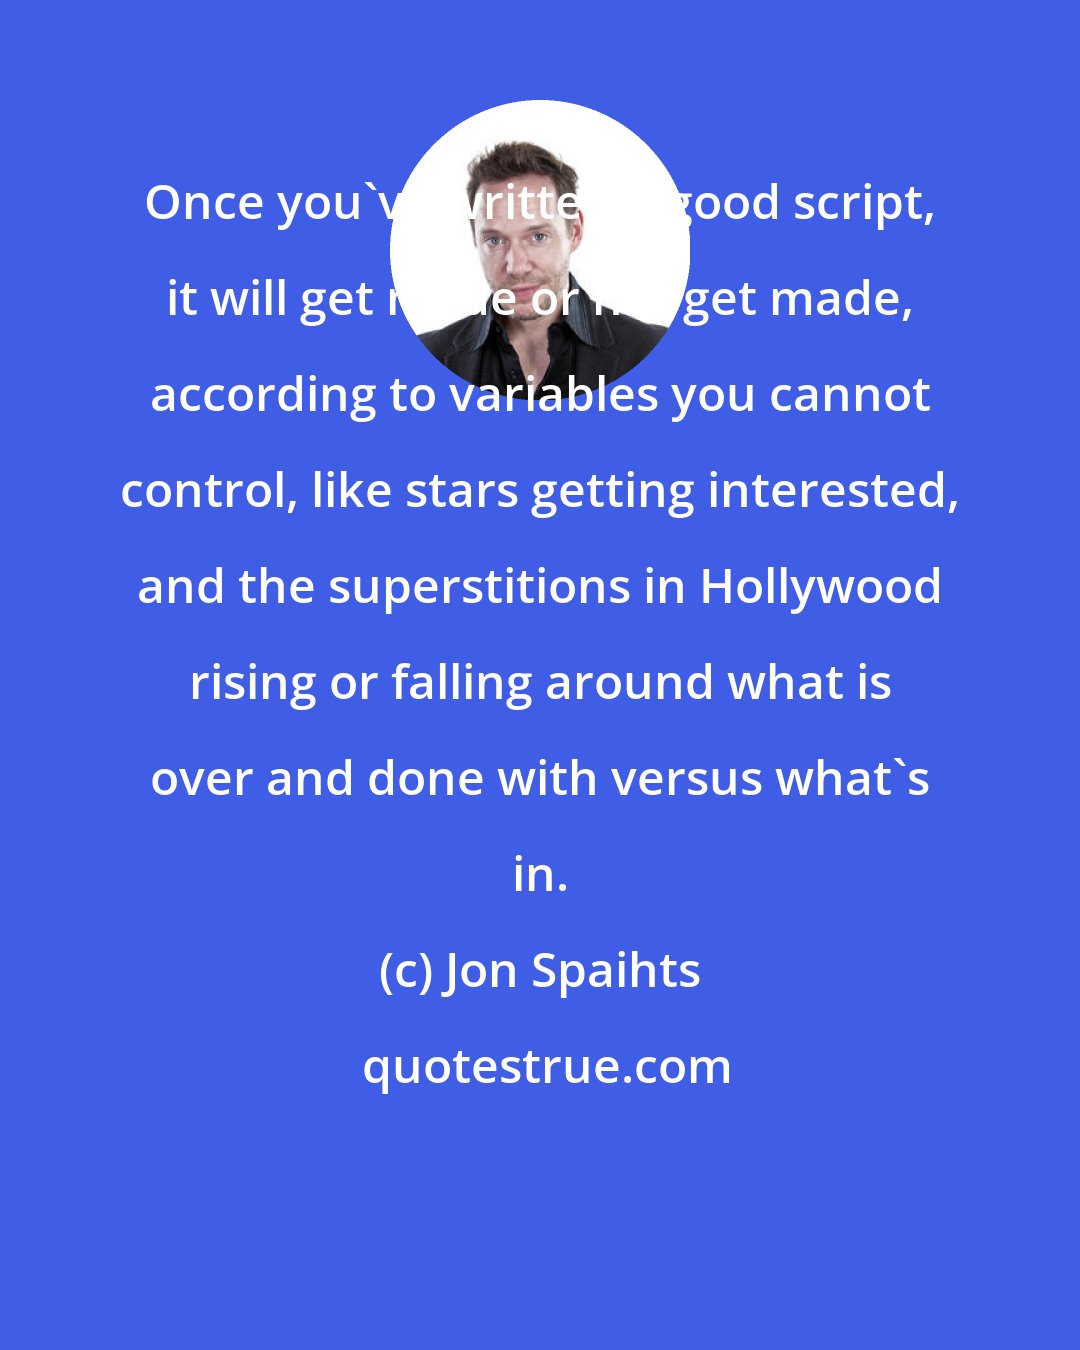 Jon Spaihts: Once you've written a good script, it will get made or not get made, according to variables you cannot control, like stars getting interested, and the superstitions in Hollywood rising or falling around what is over and done with versus what's in.